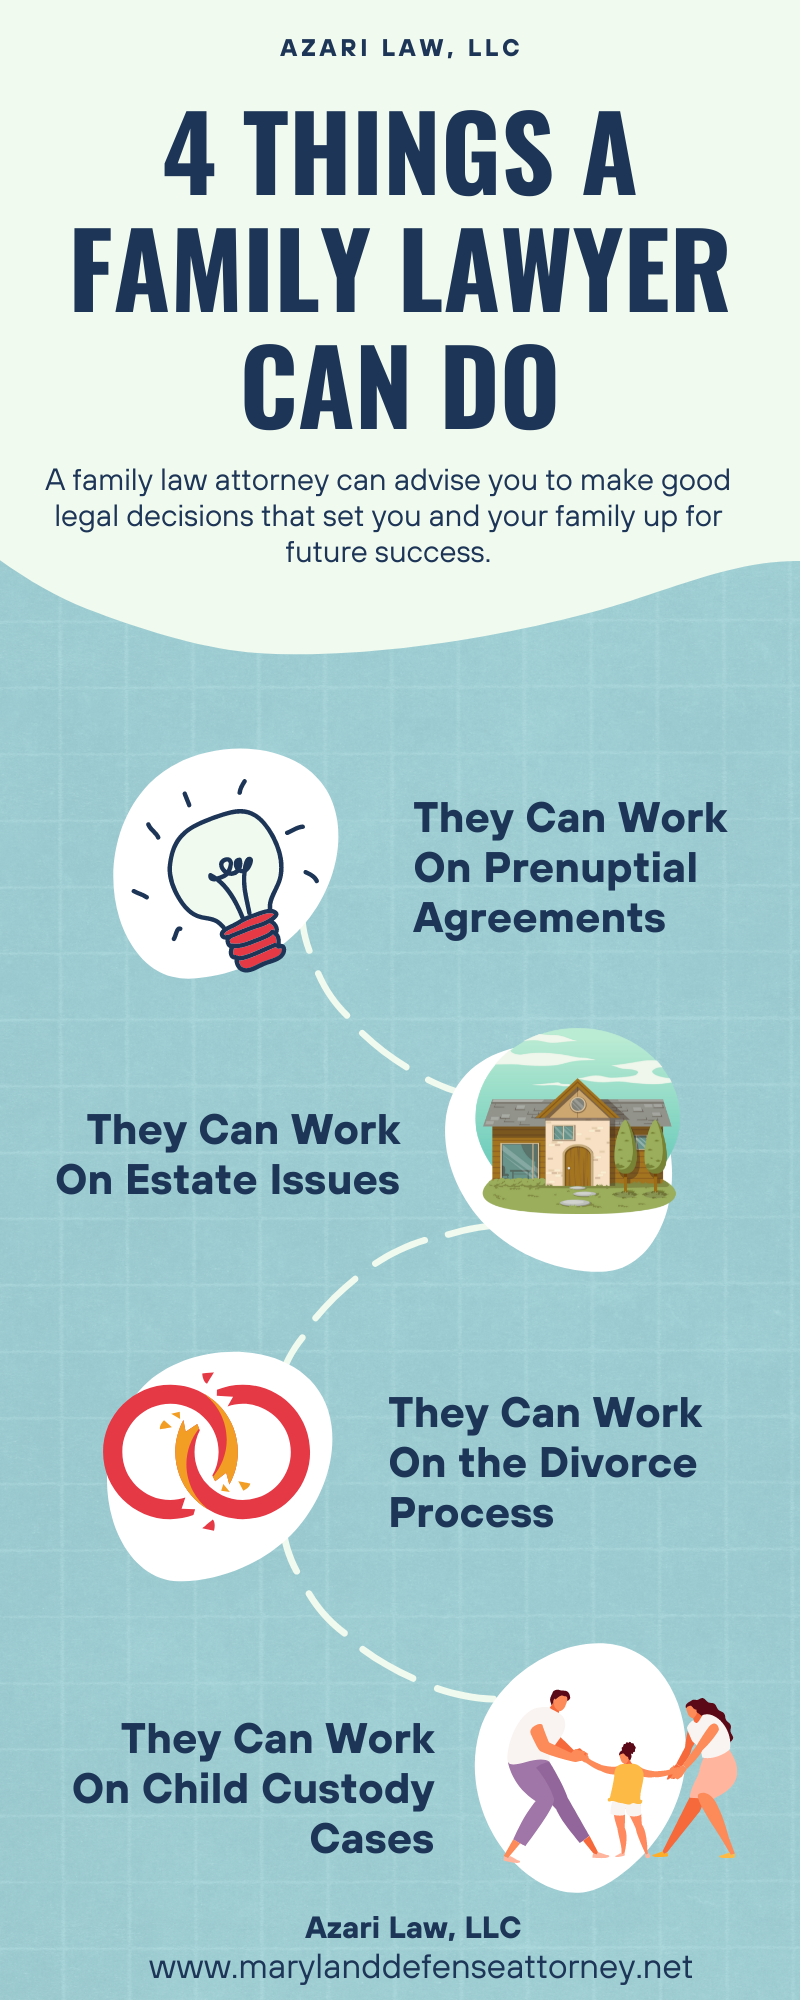 4 Things a Family Lawyer Can Do Infographic